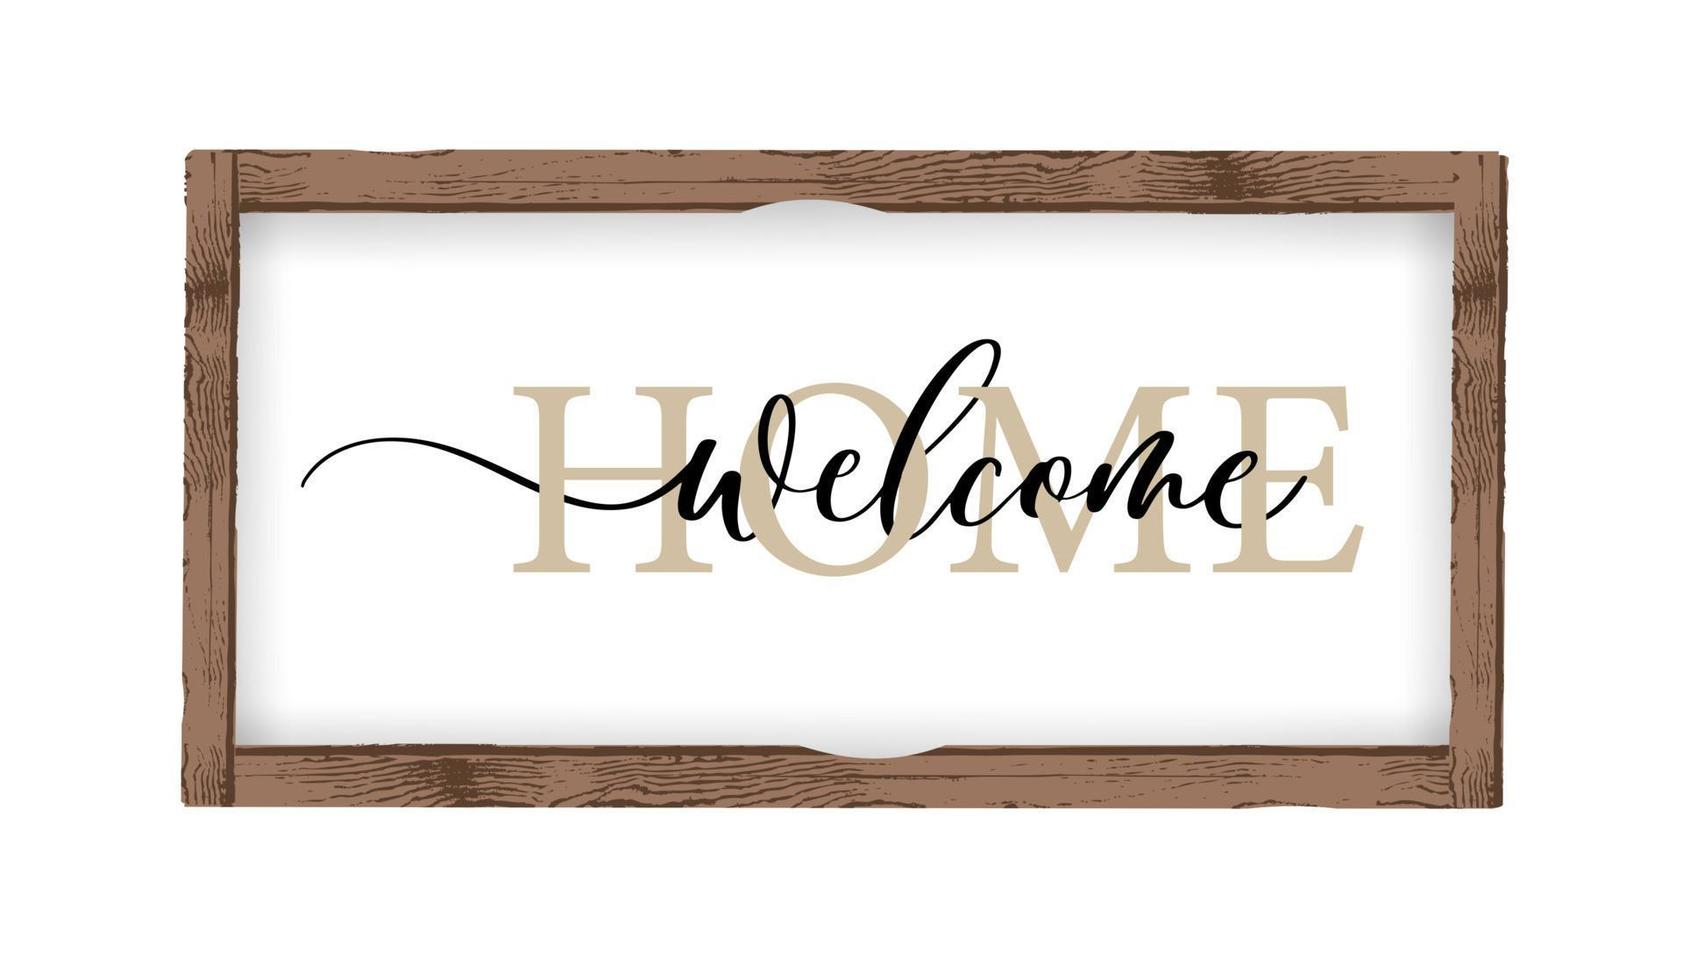 Welcome Home - calligraphic inscription with smooth lines. vector